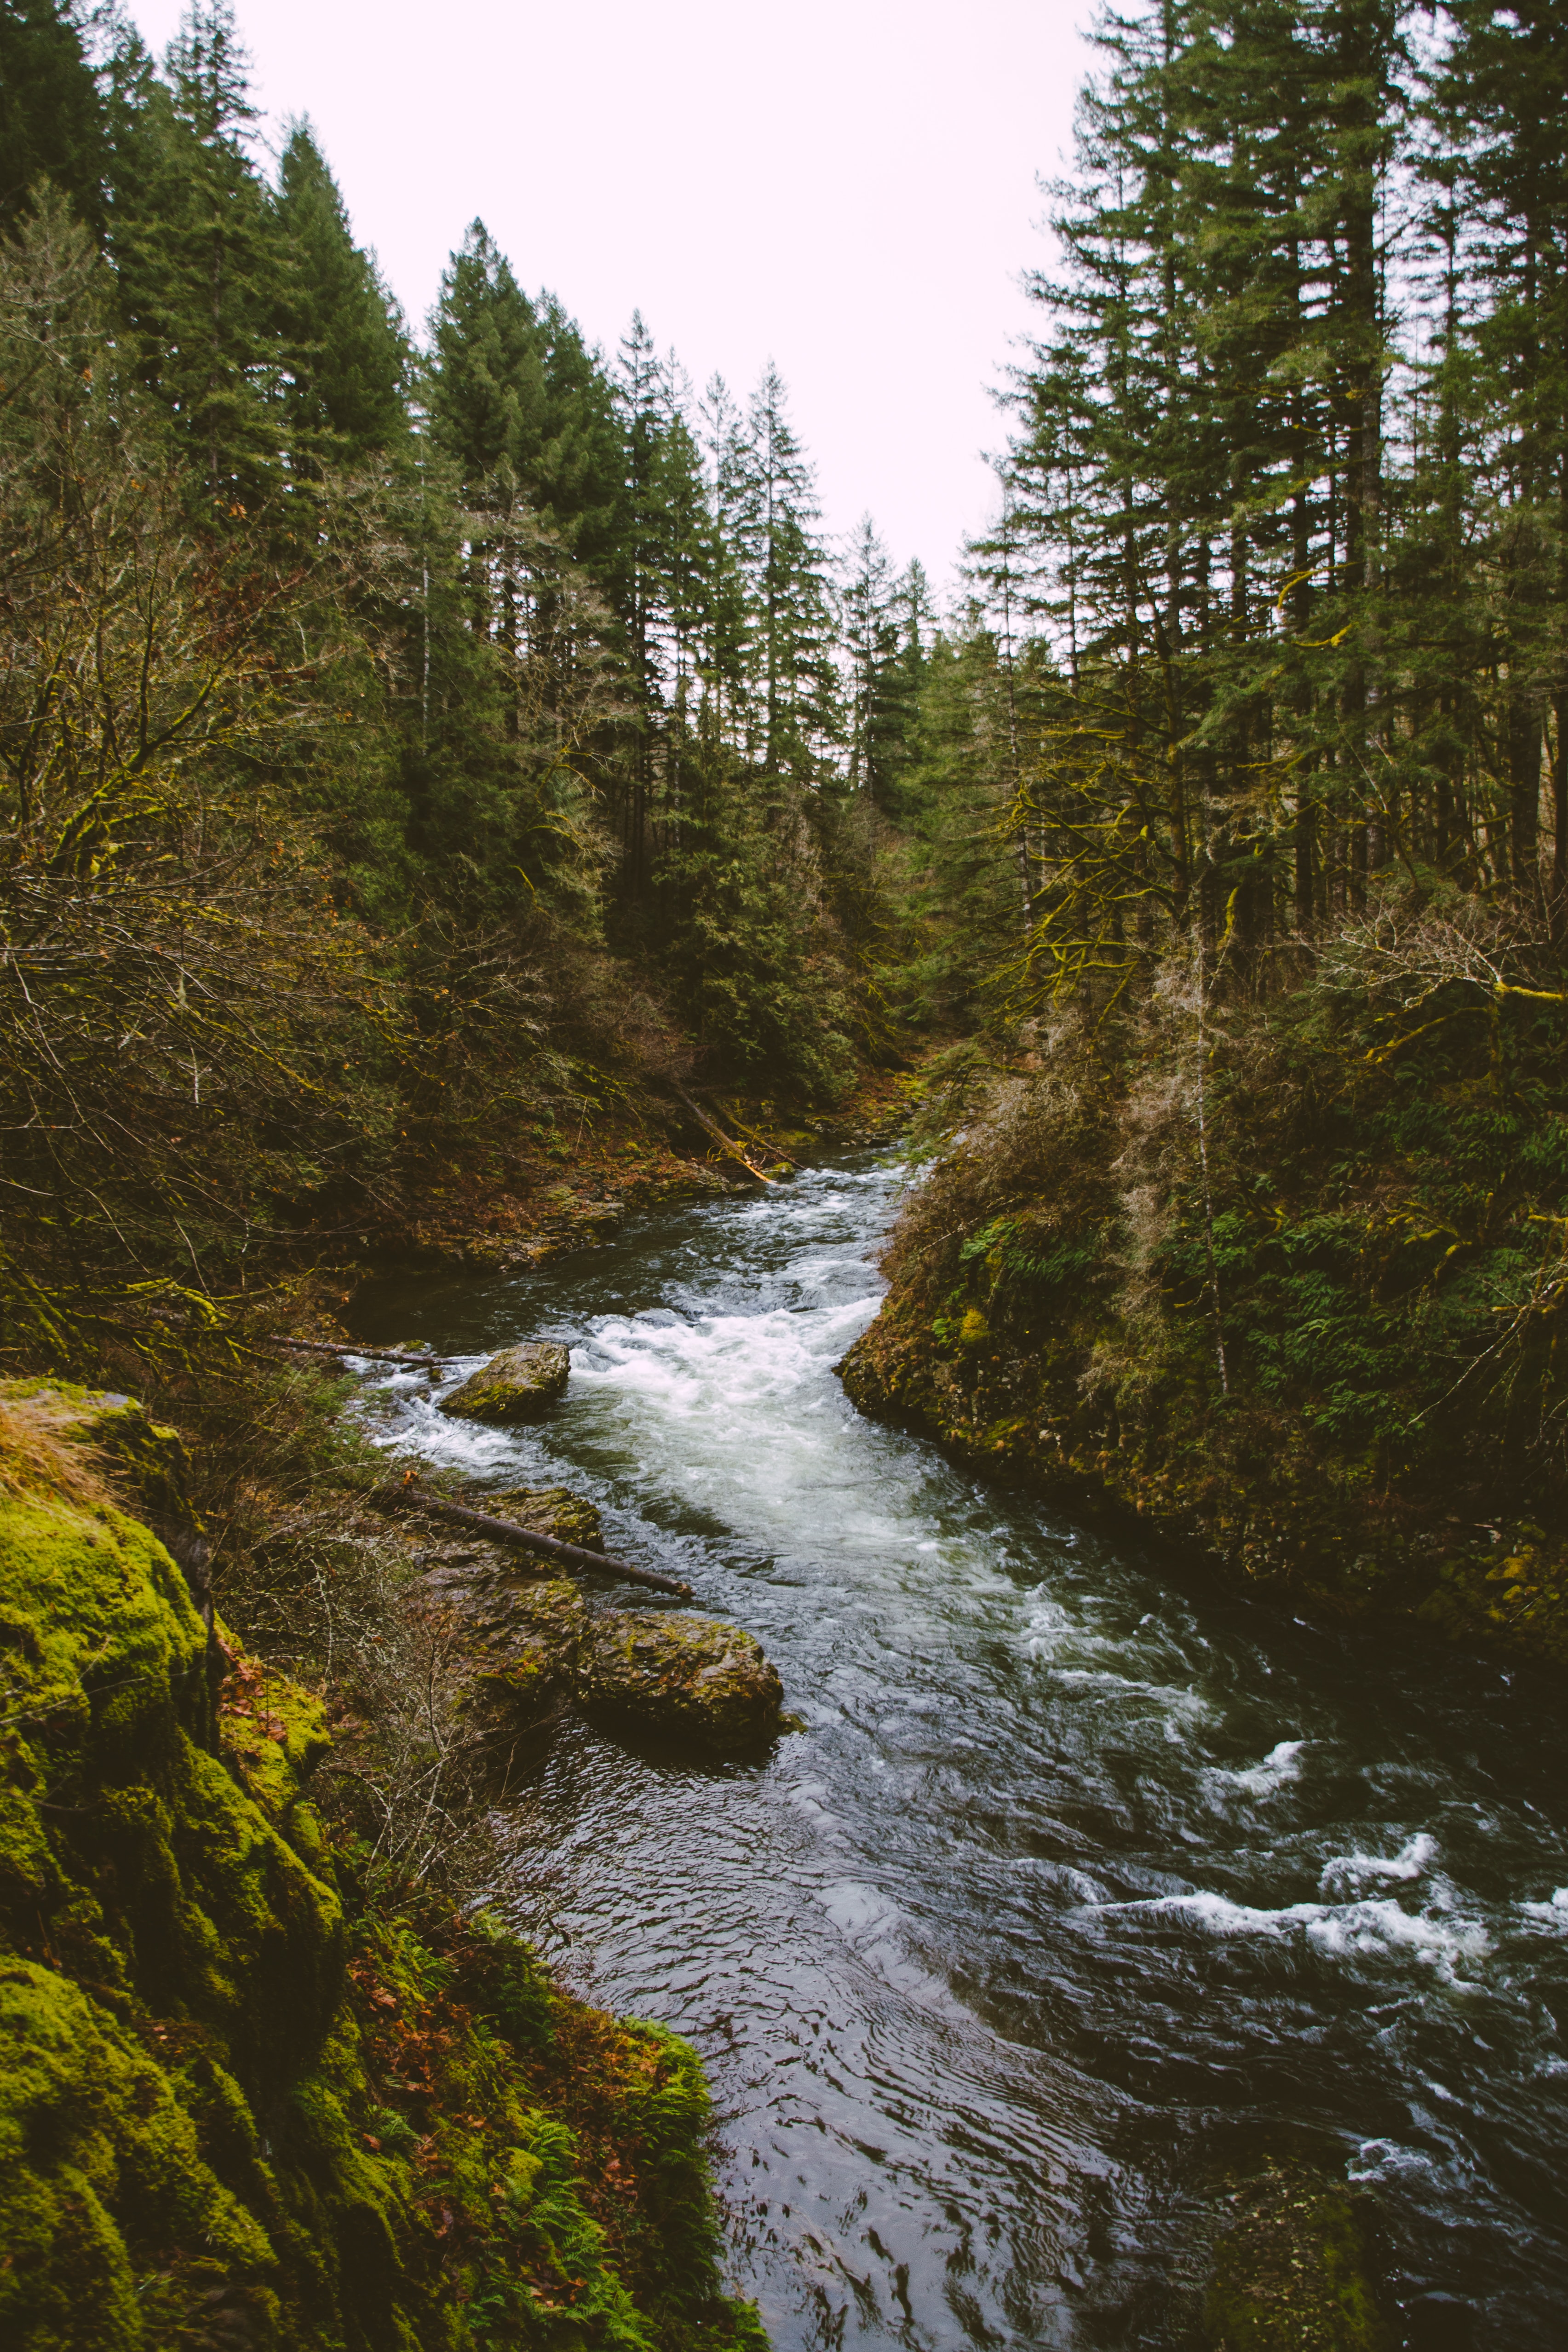 trees, stream, nature, rivers, flow, spruce, fir wallpaper for mobile